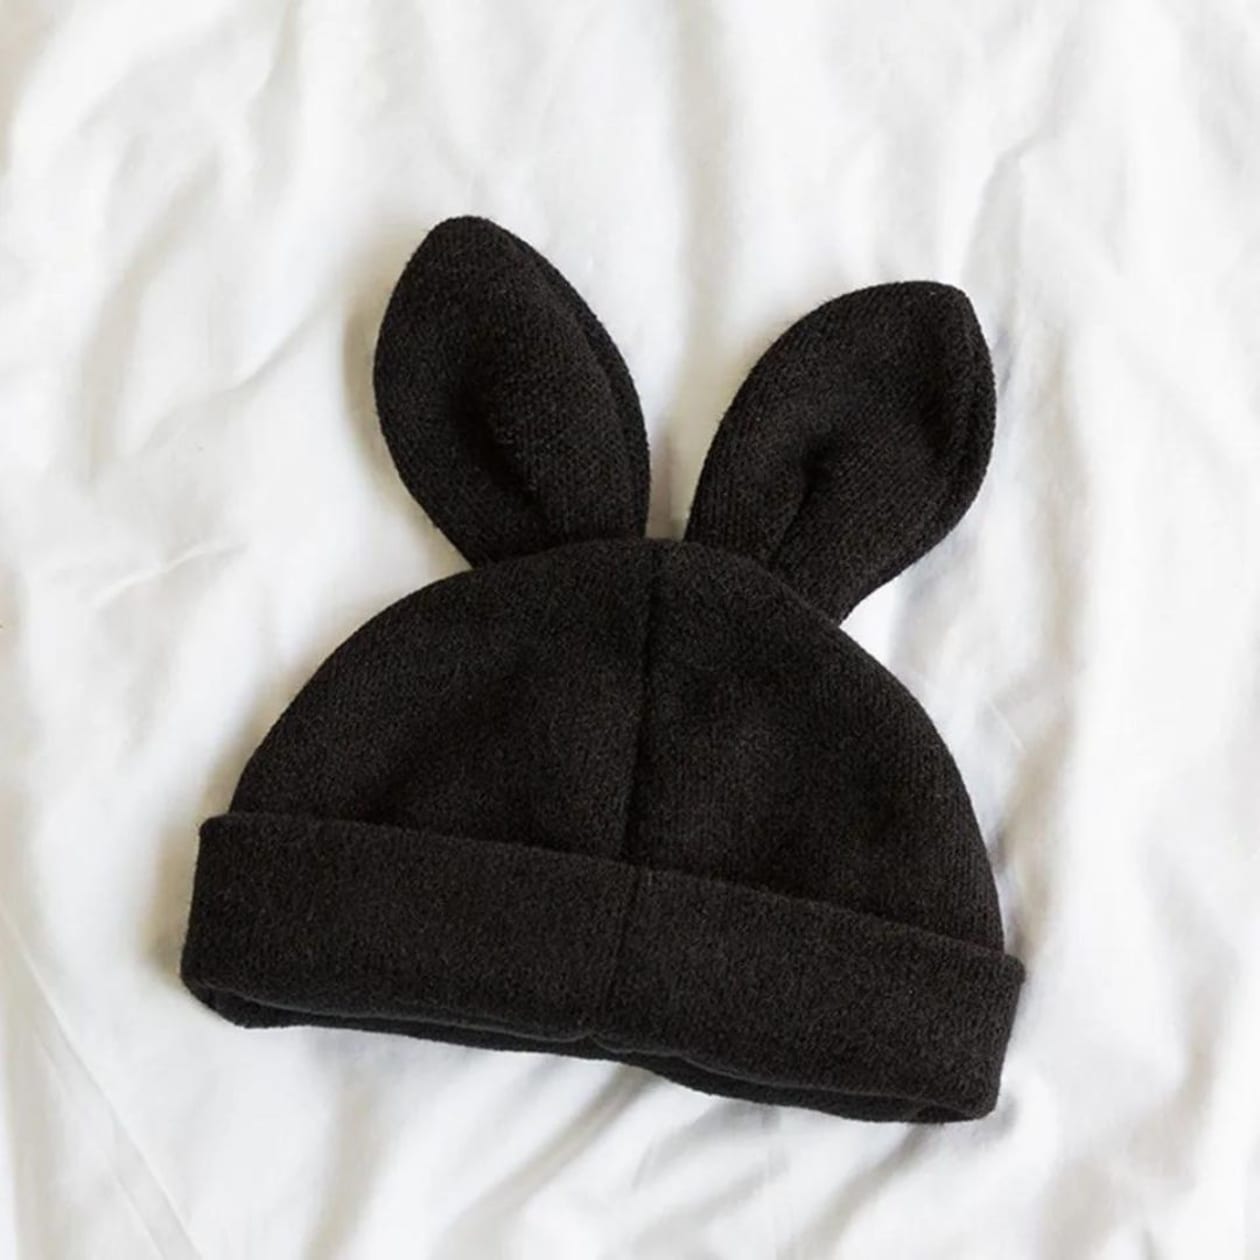 Bunny Ears Beanie Hat in Black or Winter White - Color: Black